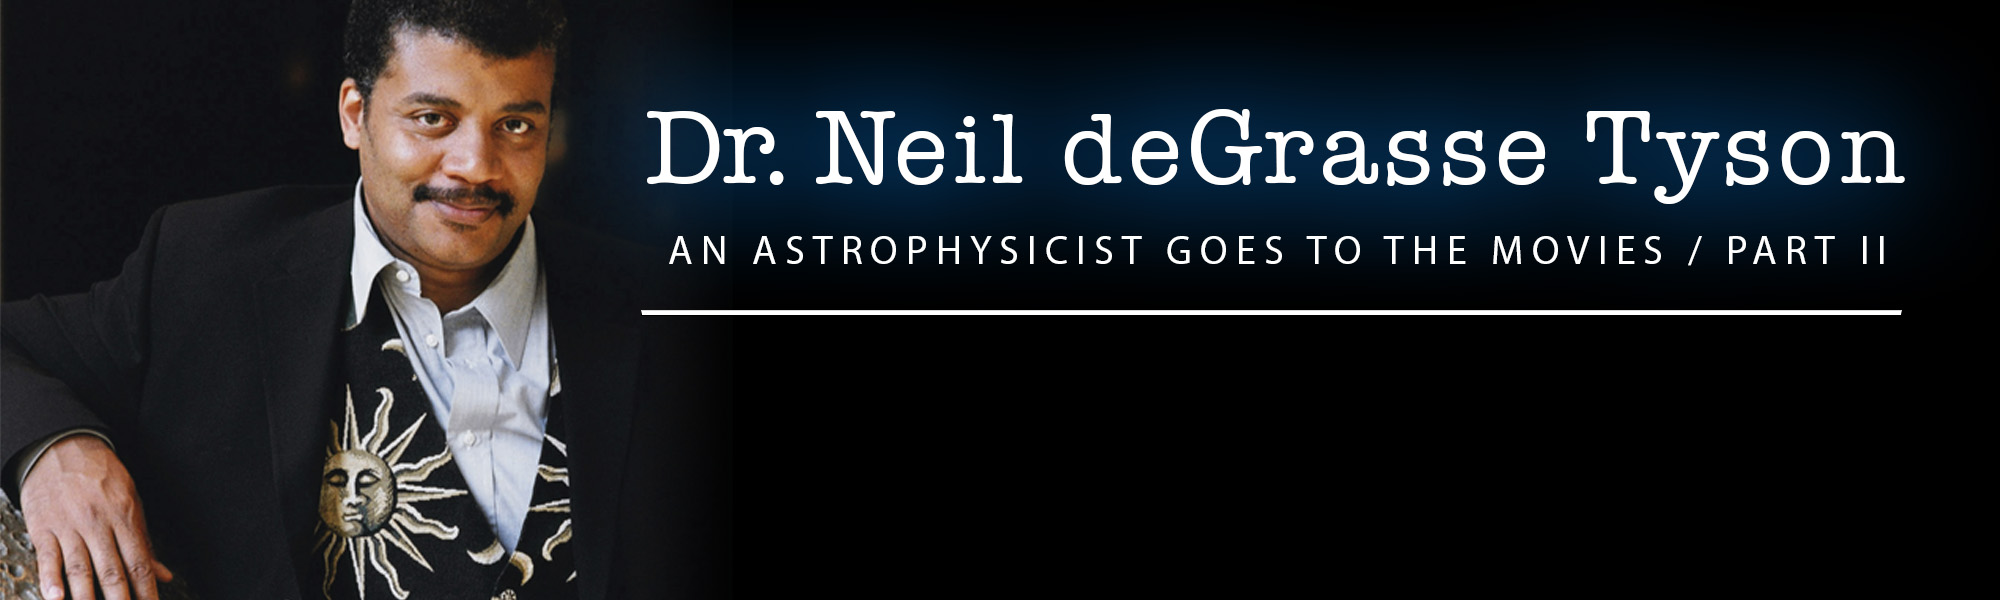 Dr. Neil deGrasse Tyson: An Astrophysicist Goes to the Movies, Part II